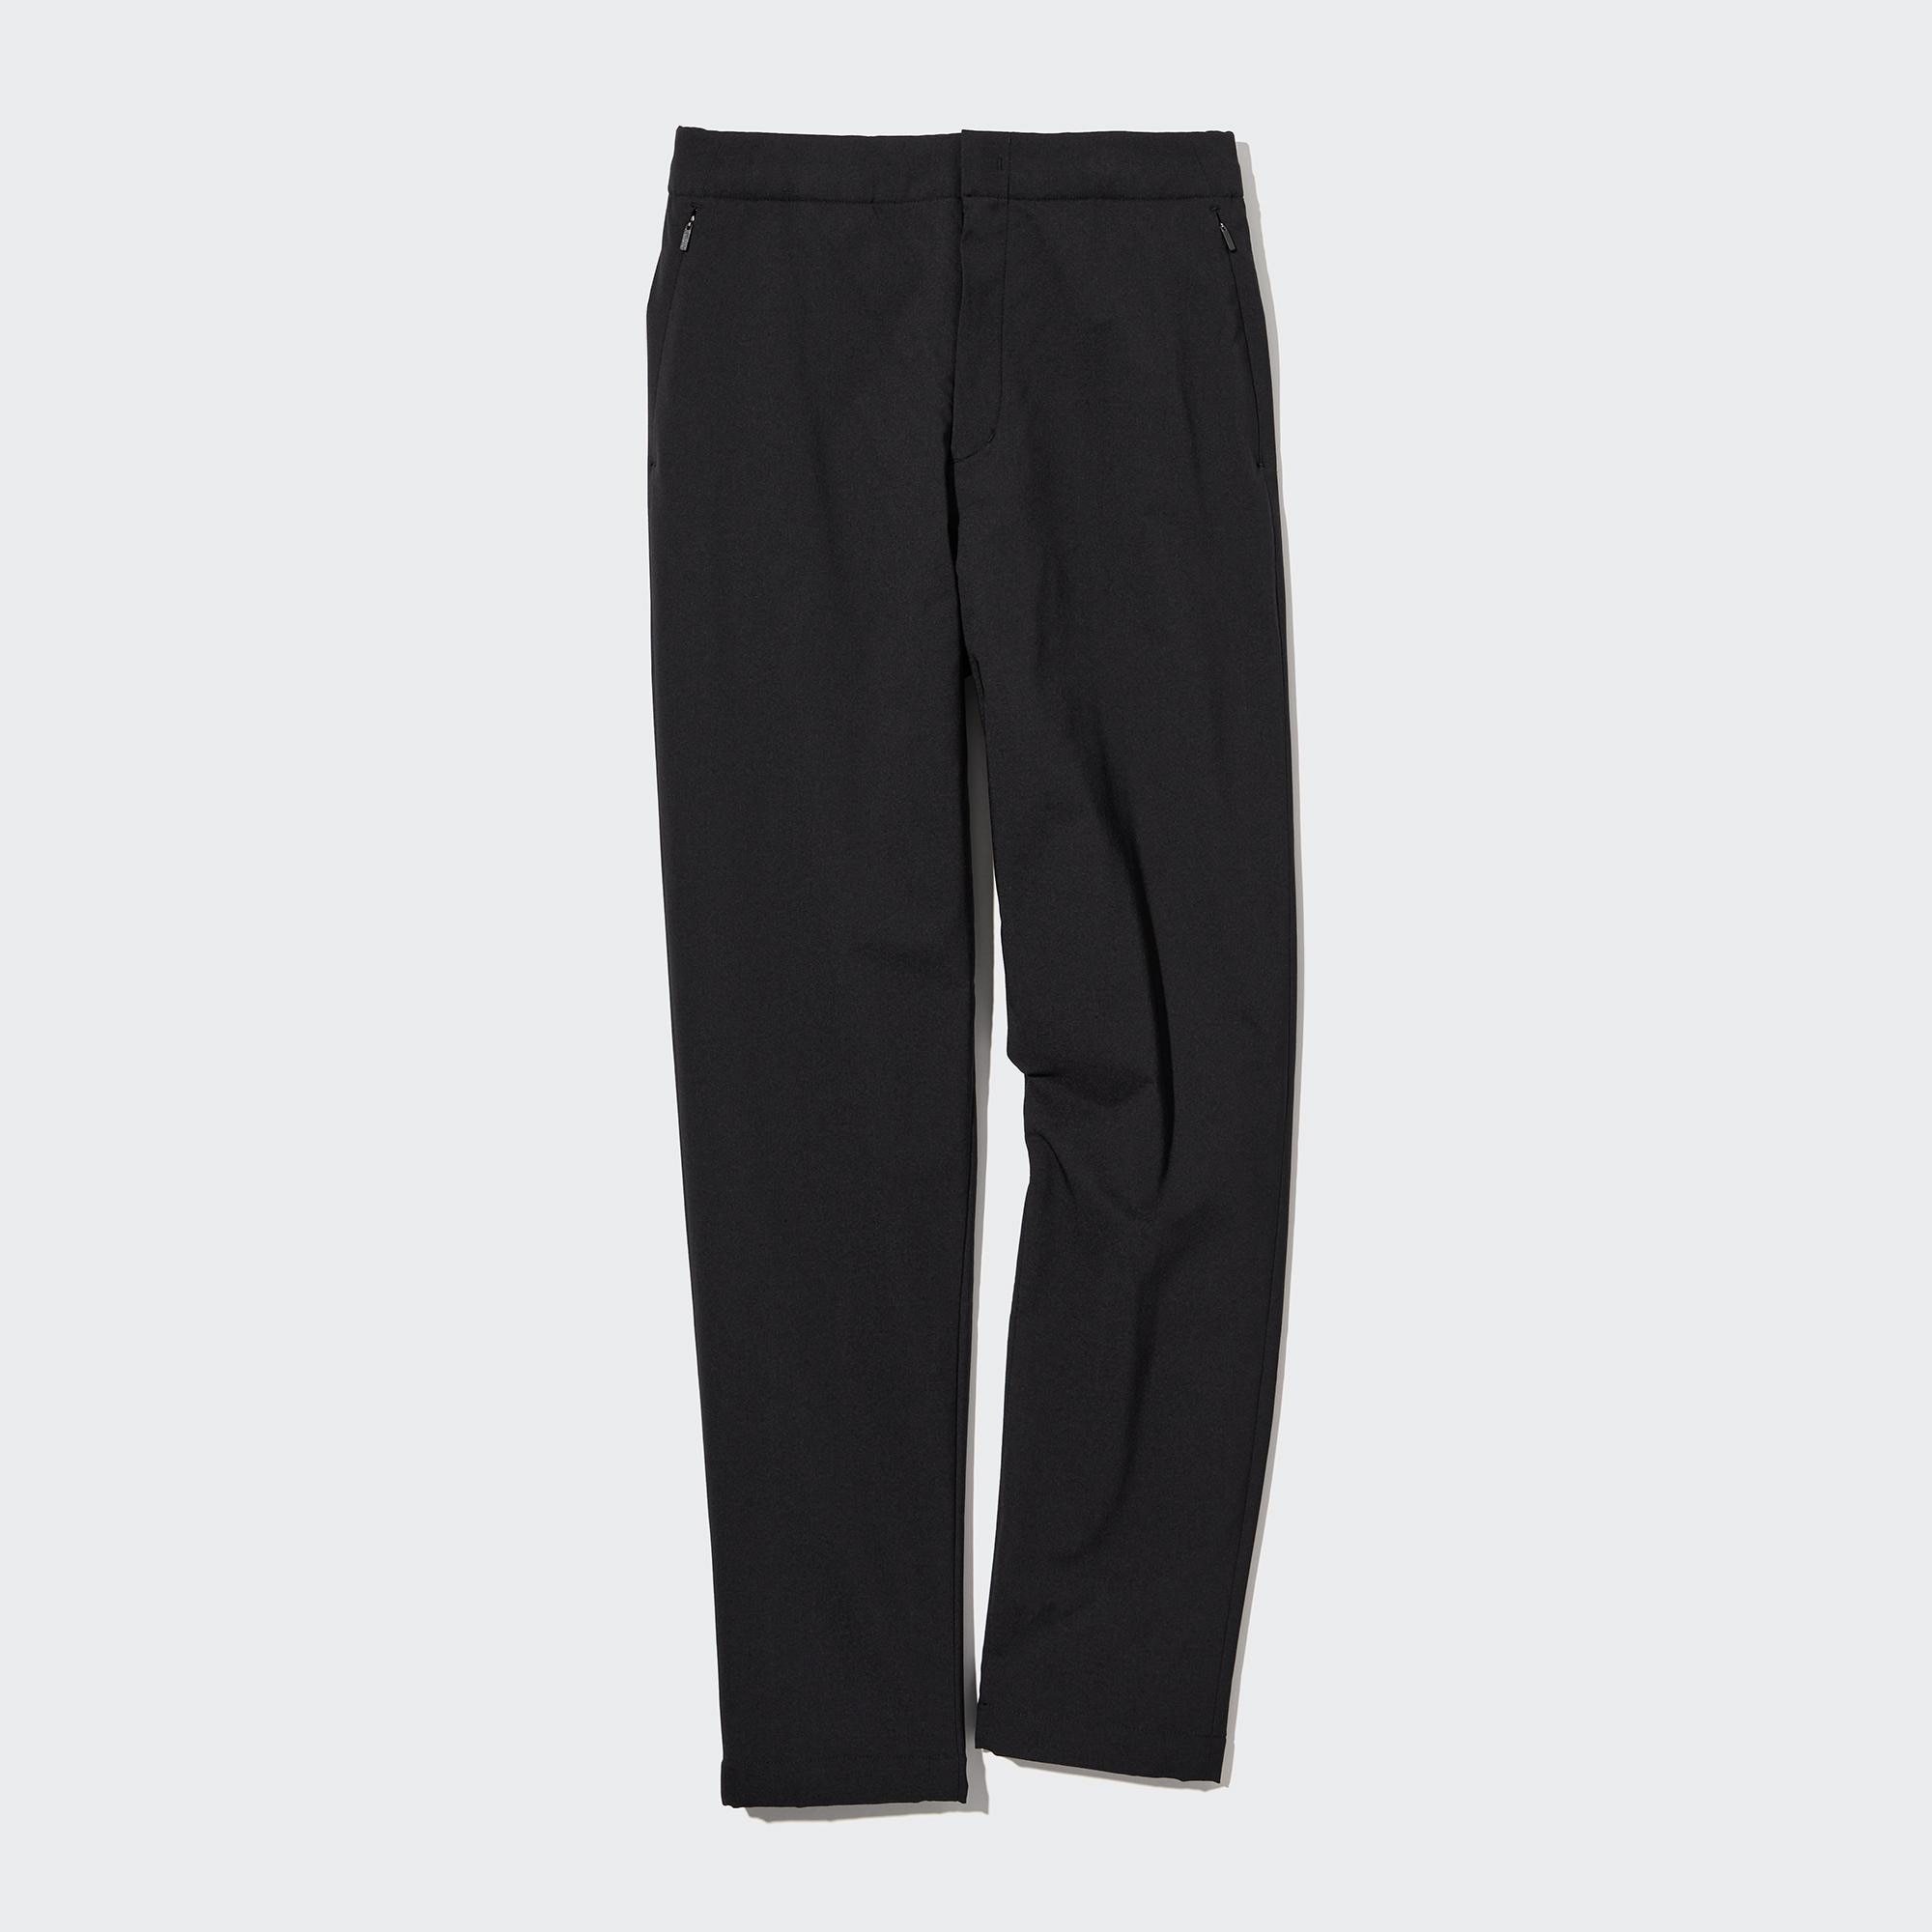 Waterproof Fleece-Lined Trousers at Cotton Traders